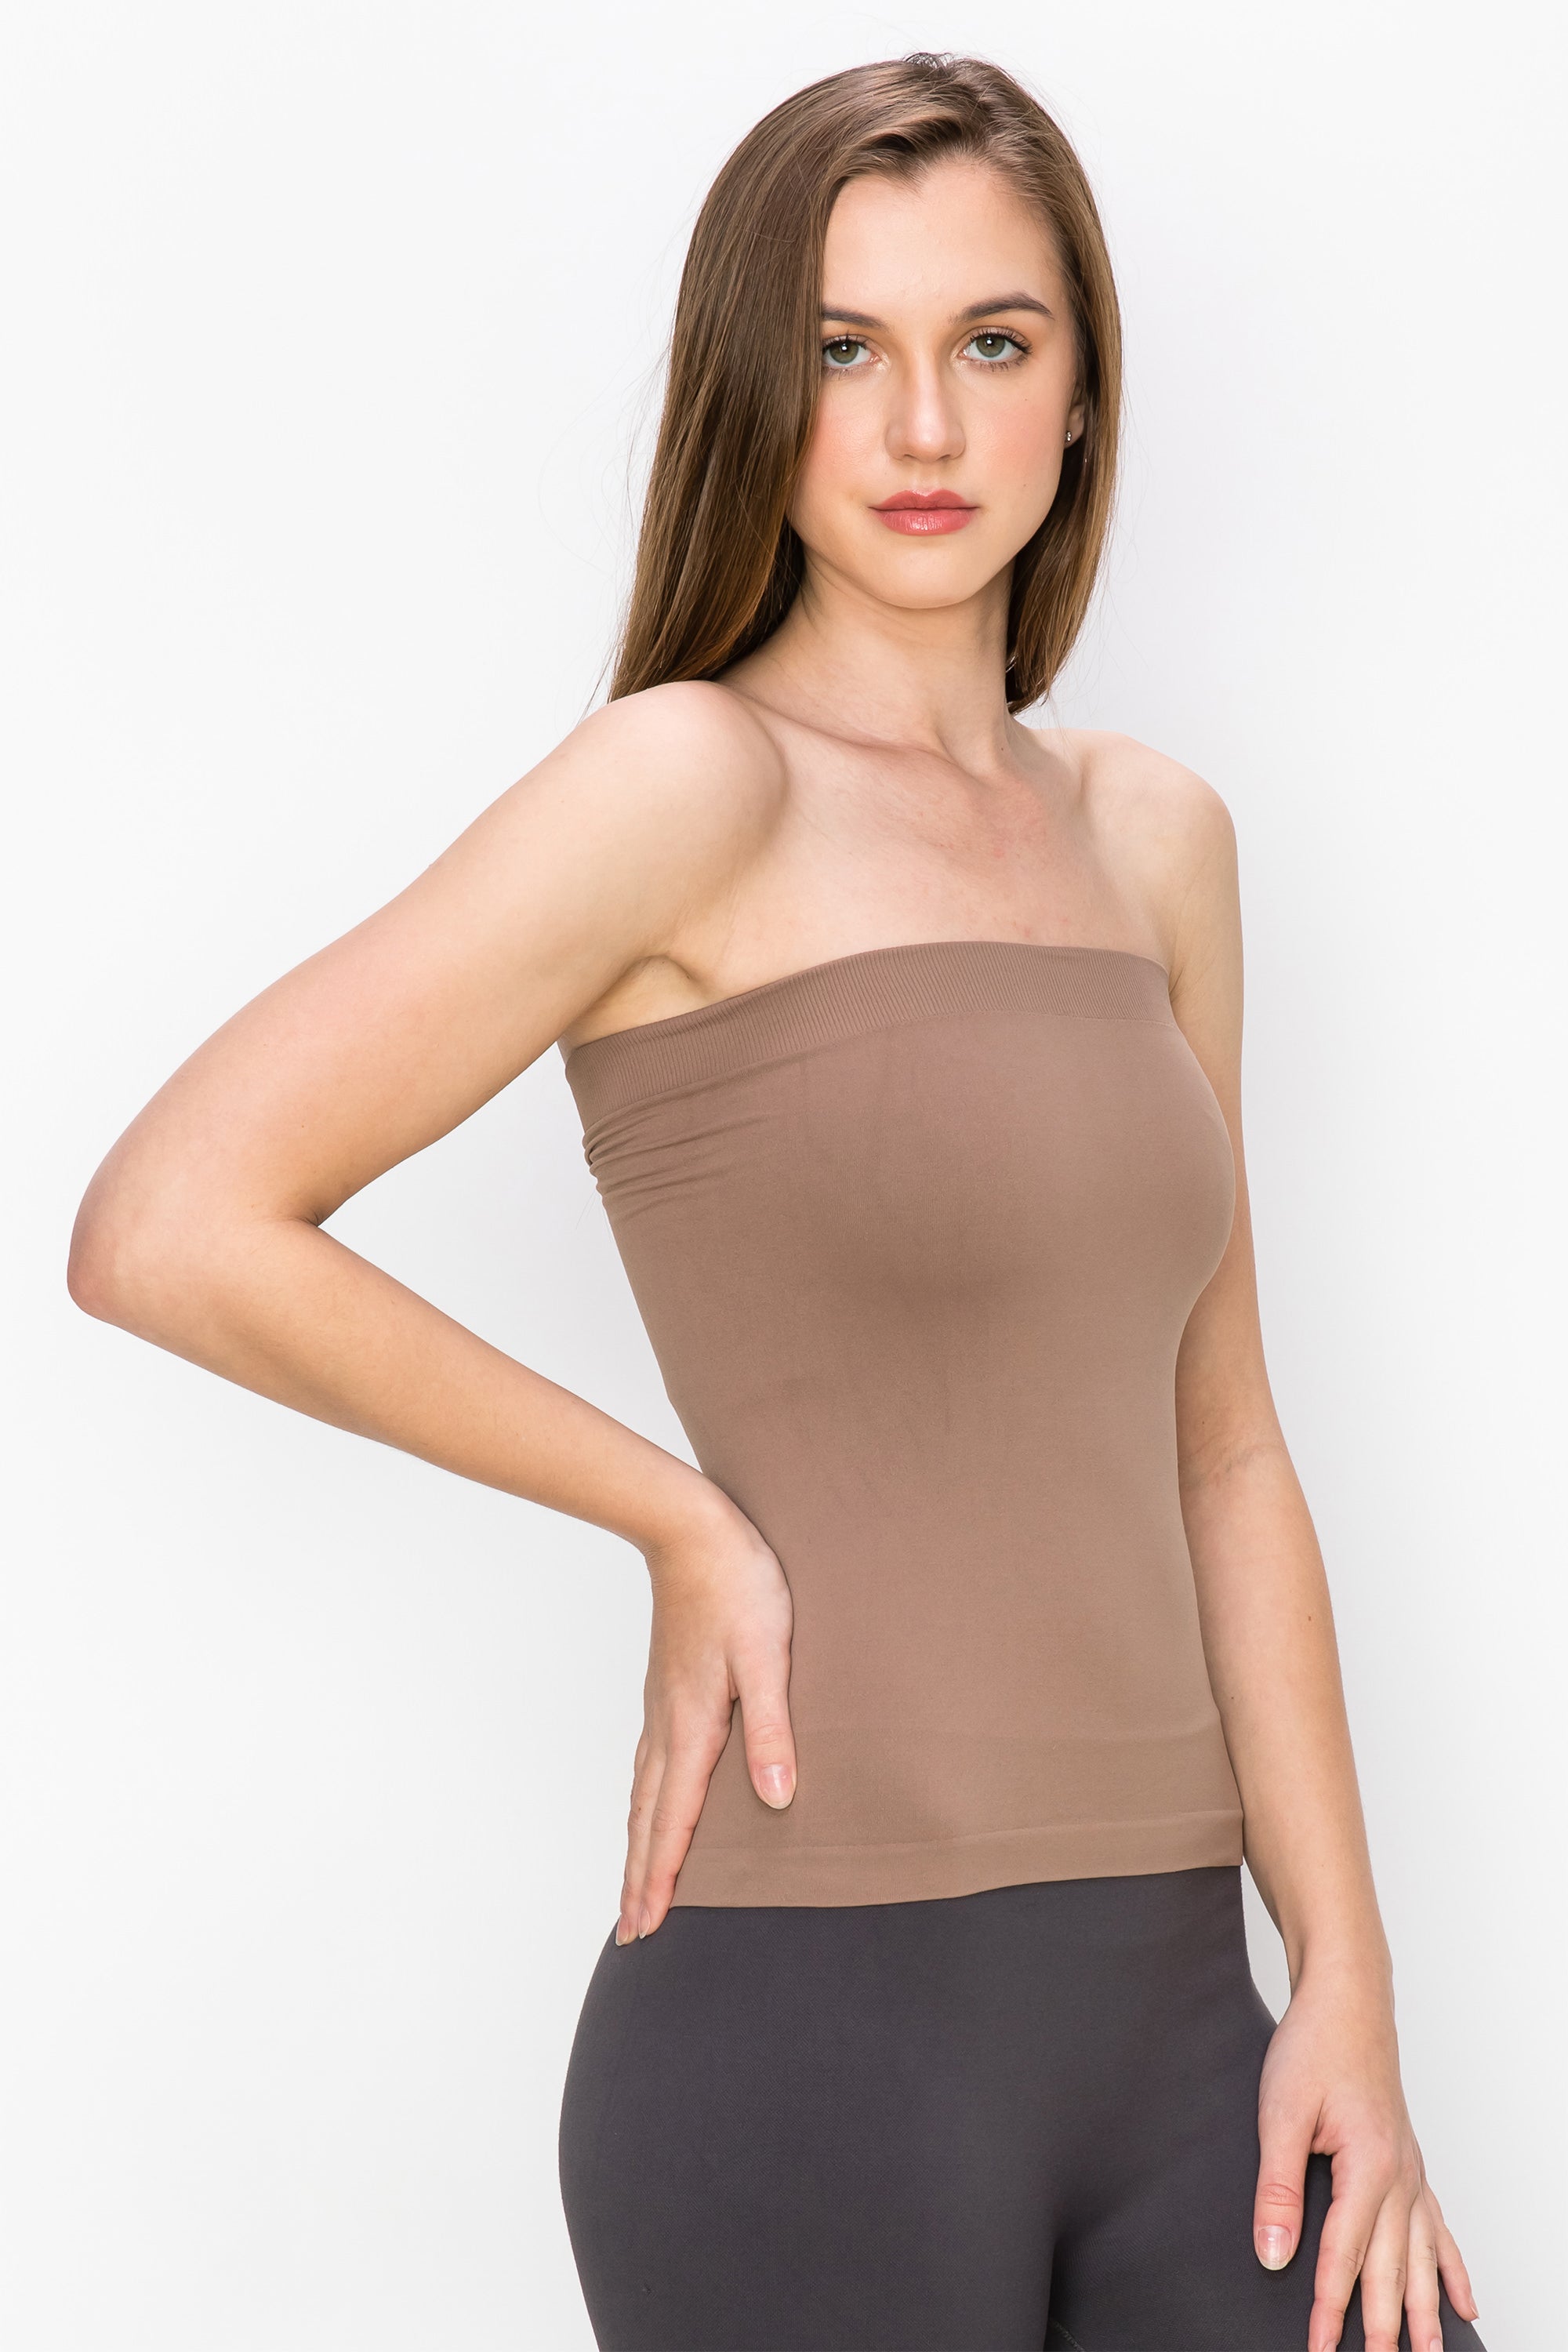 Tube Top With Built-in Bra